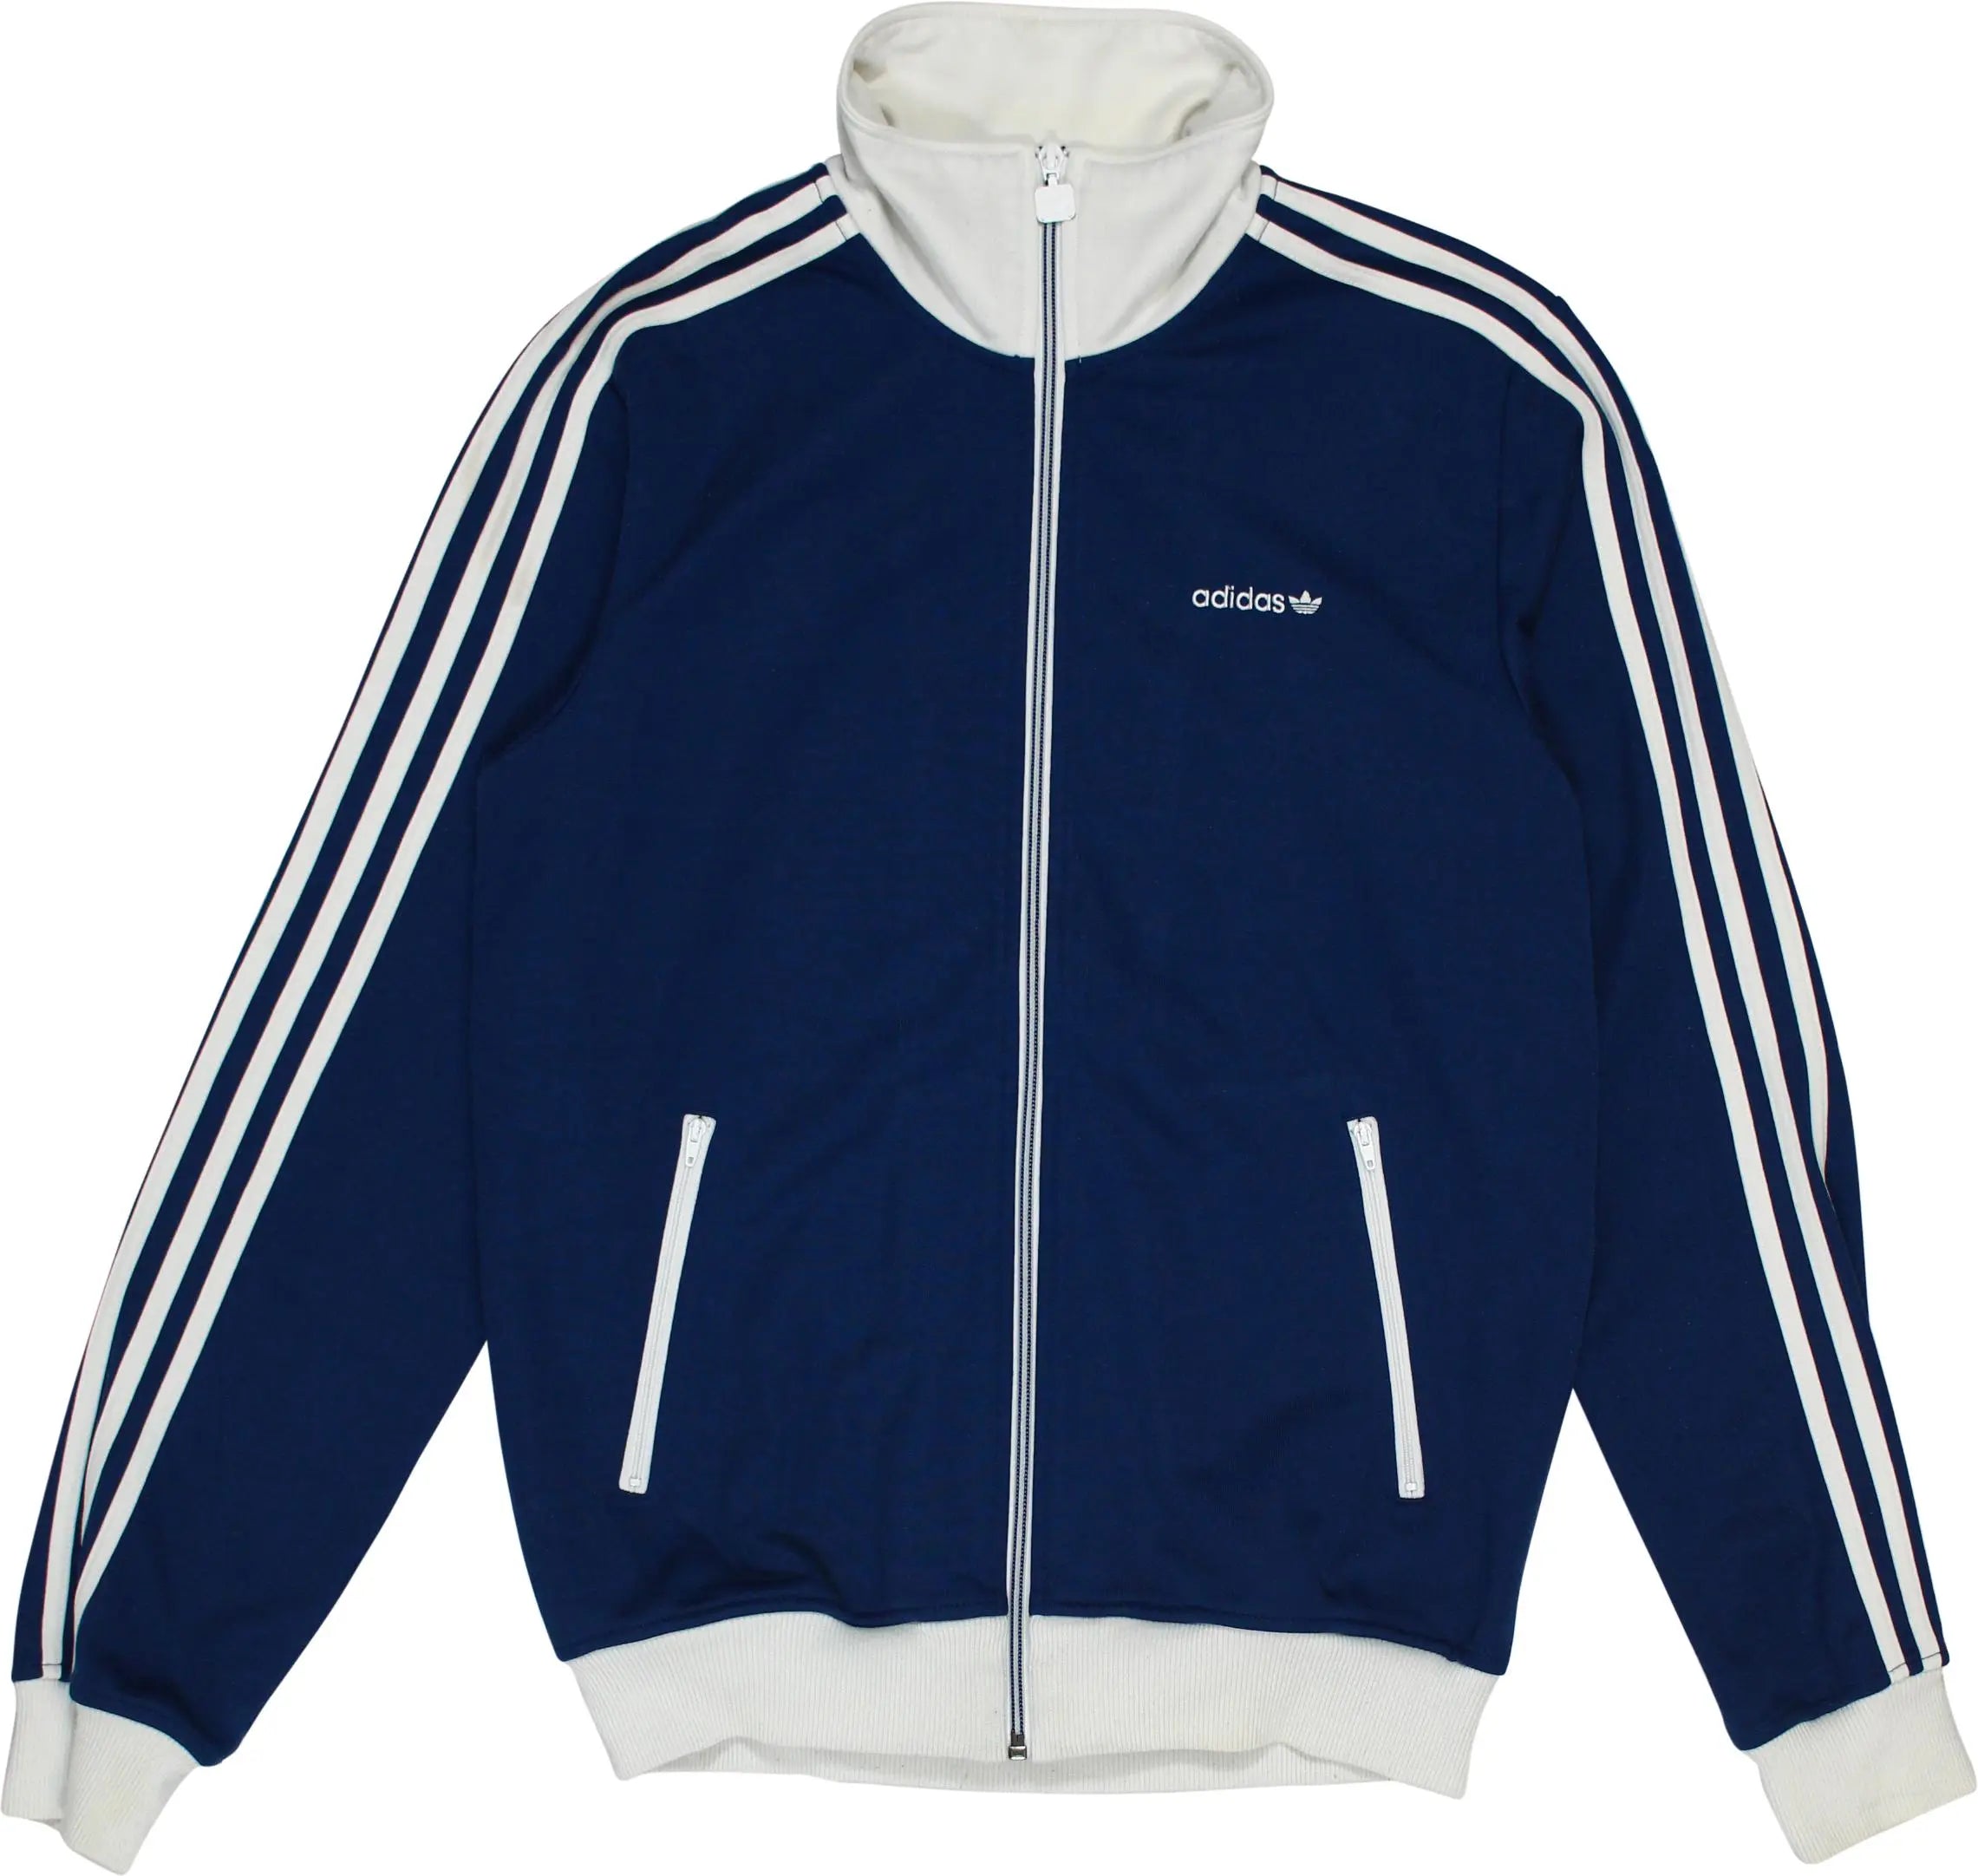 Adidas - Retro Track Jacket by Adidas- ThriftTale.com - Vintage and second handclothing